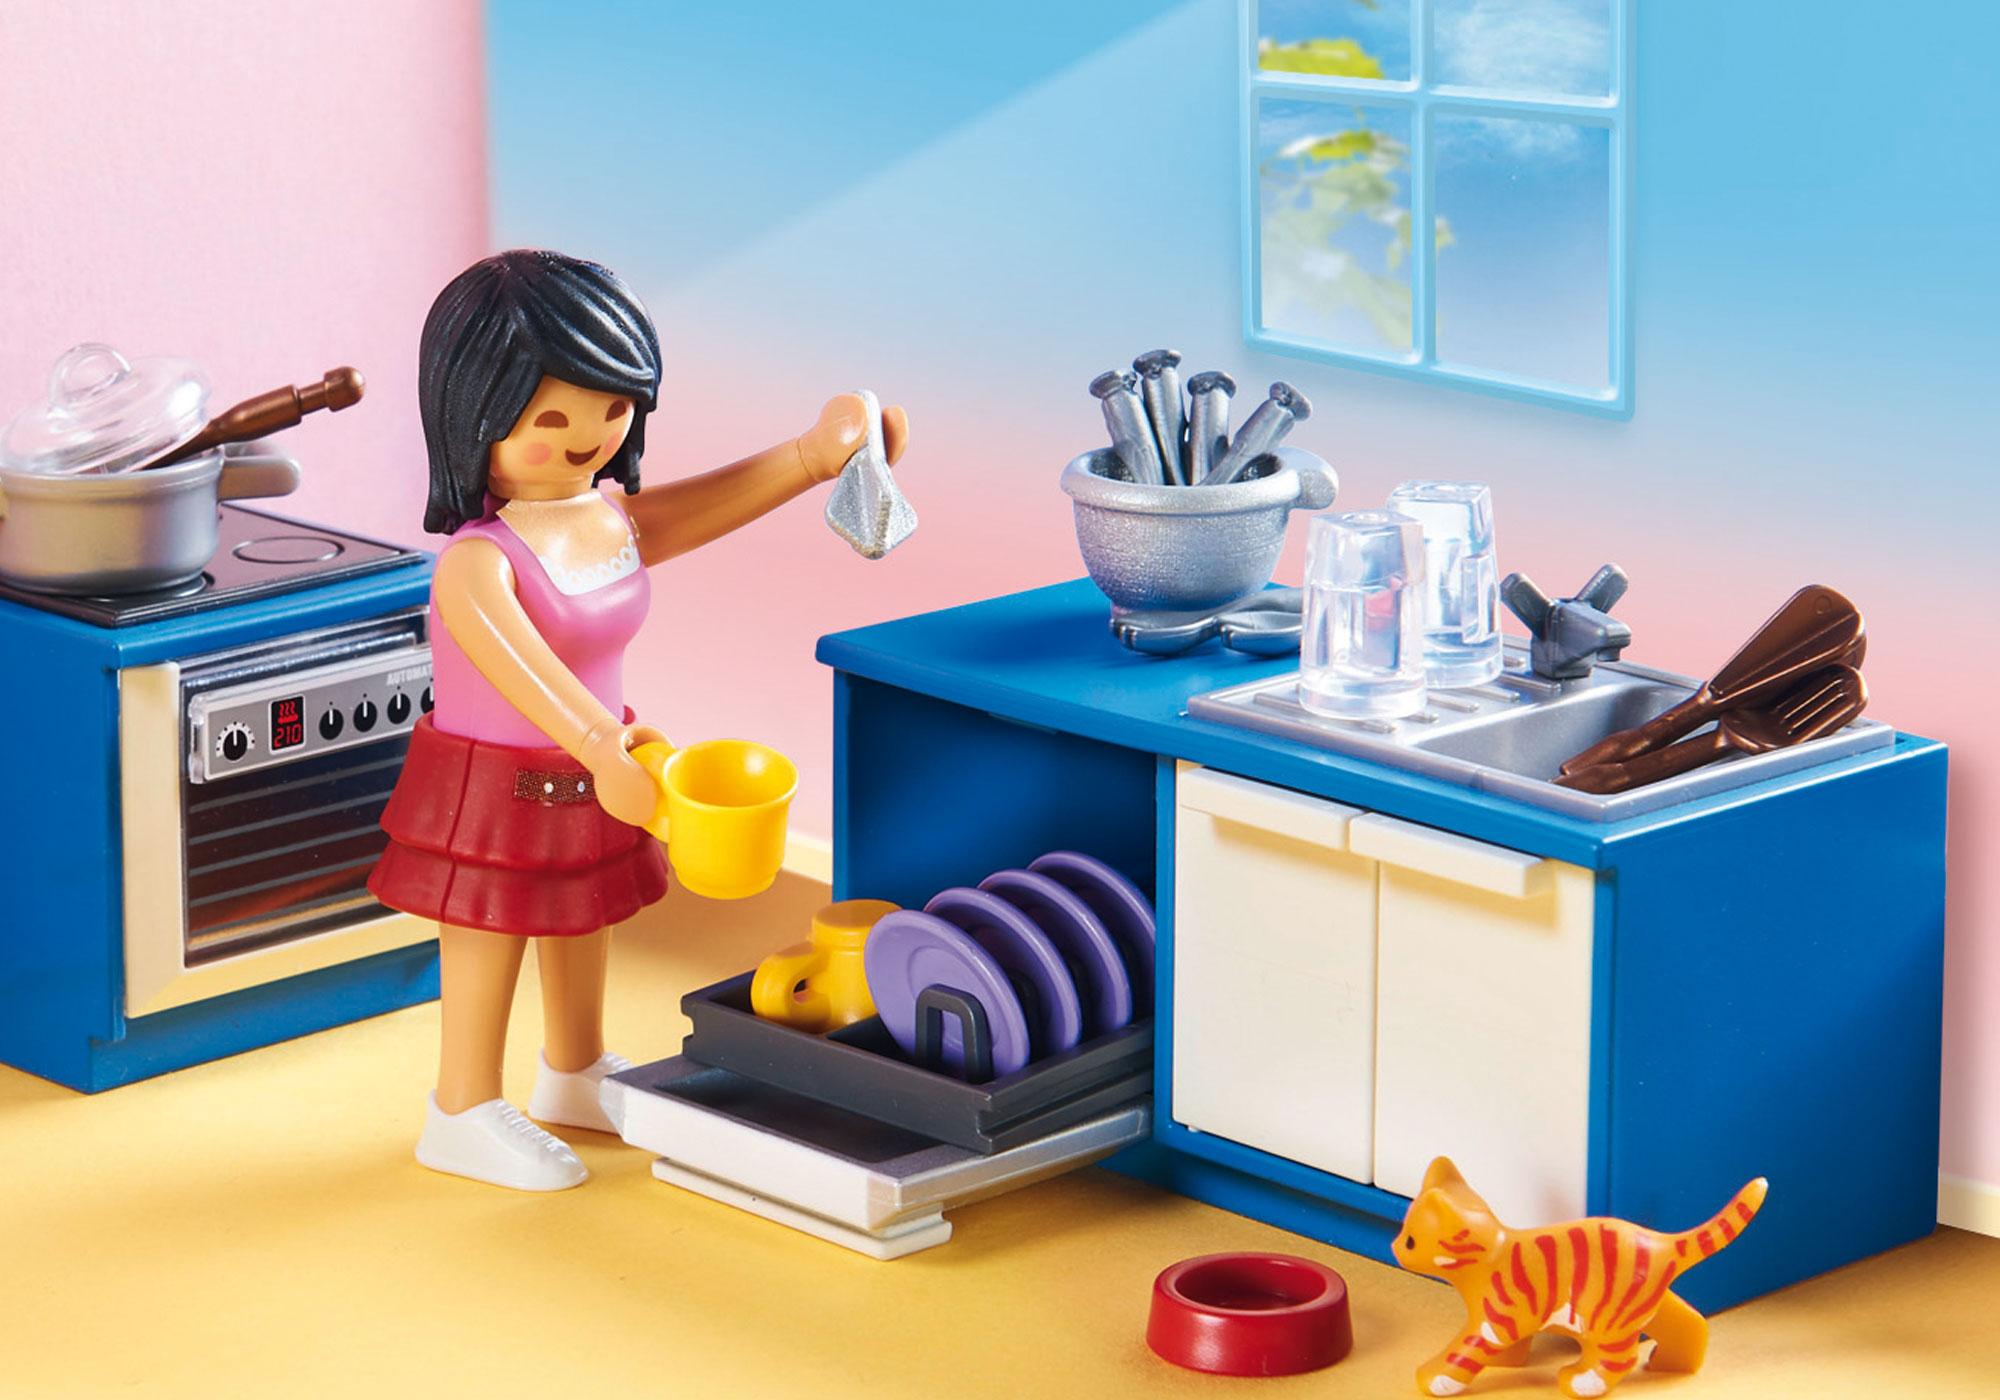 Dollhouse Family Kitchen 70206 - Mildred & Dildred